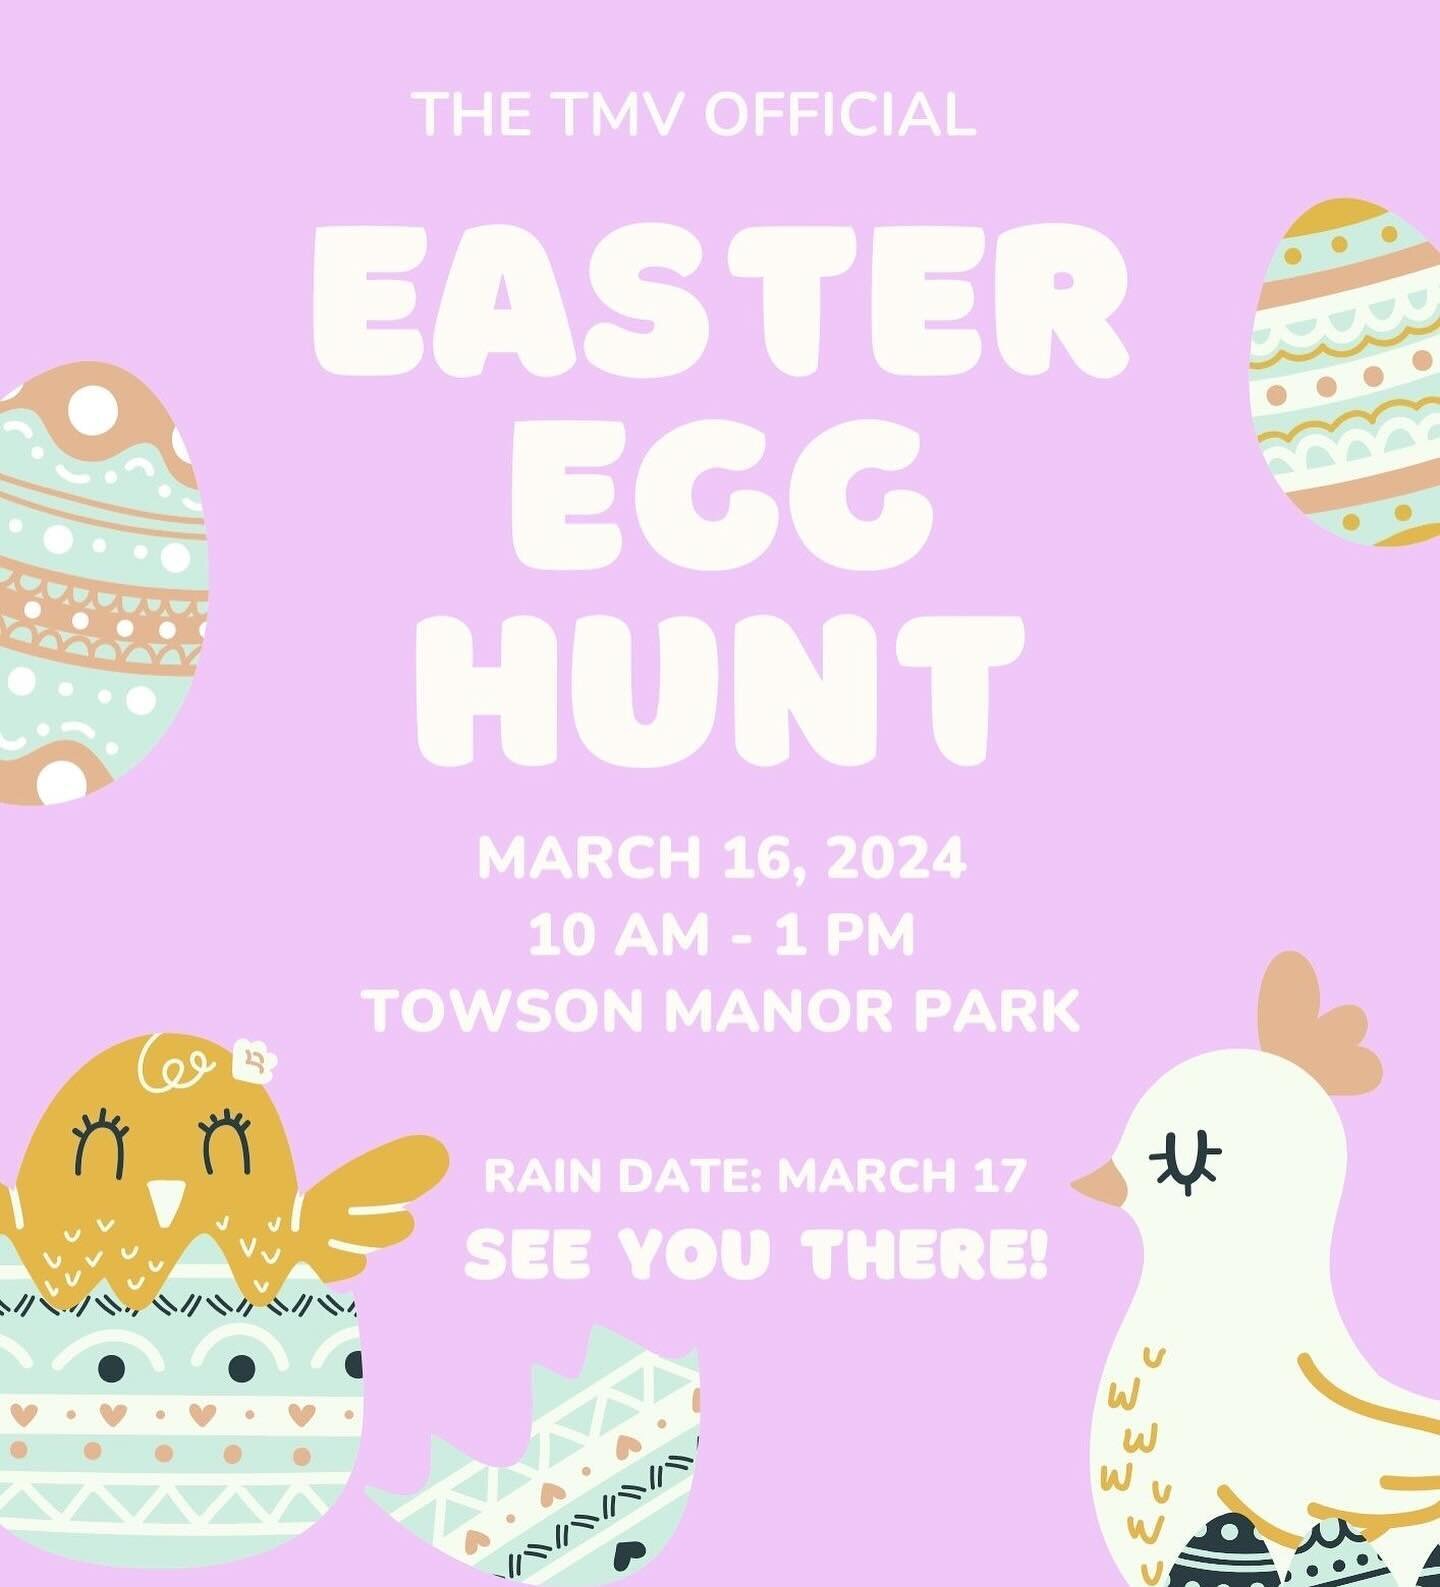 Hold onto your baskets! The first official community Easter Egg hunt is ON 🐣 

Sign up your littles by going to towsonmanorvillage.org and click the flyer on the main page or text Sara at 610-216-0968. We want to make sure our head bunny drops plent